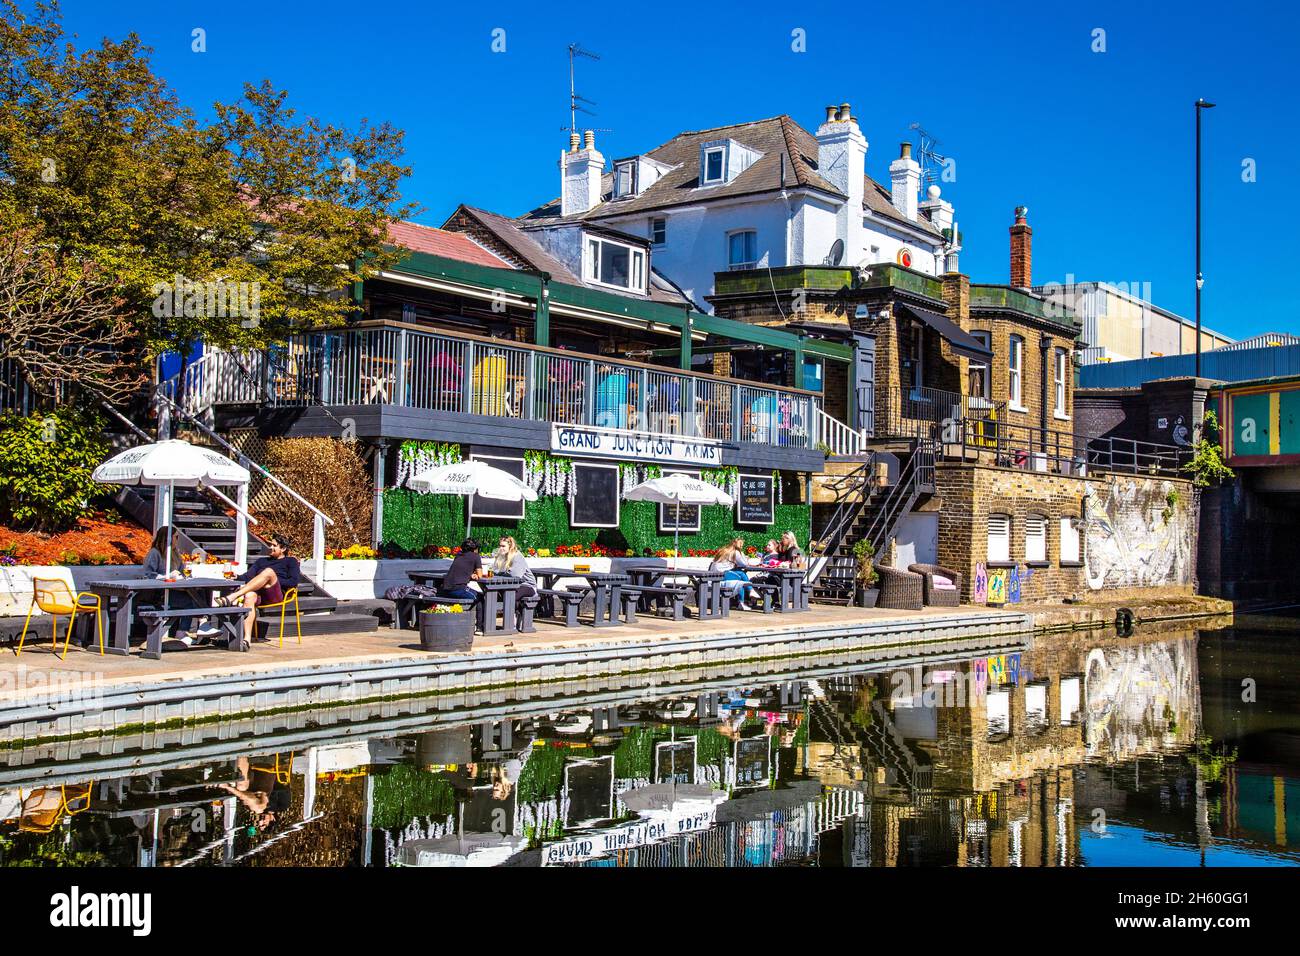 People having drinks outdoors by the Grand Union Canal at Grand Junction Arms pub, Harlesden, London, UK Stock Photo